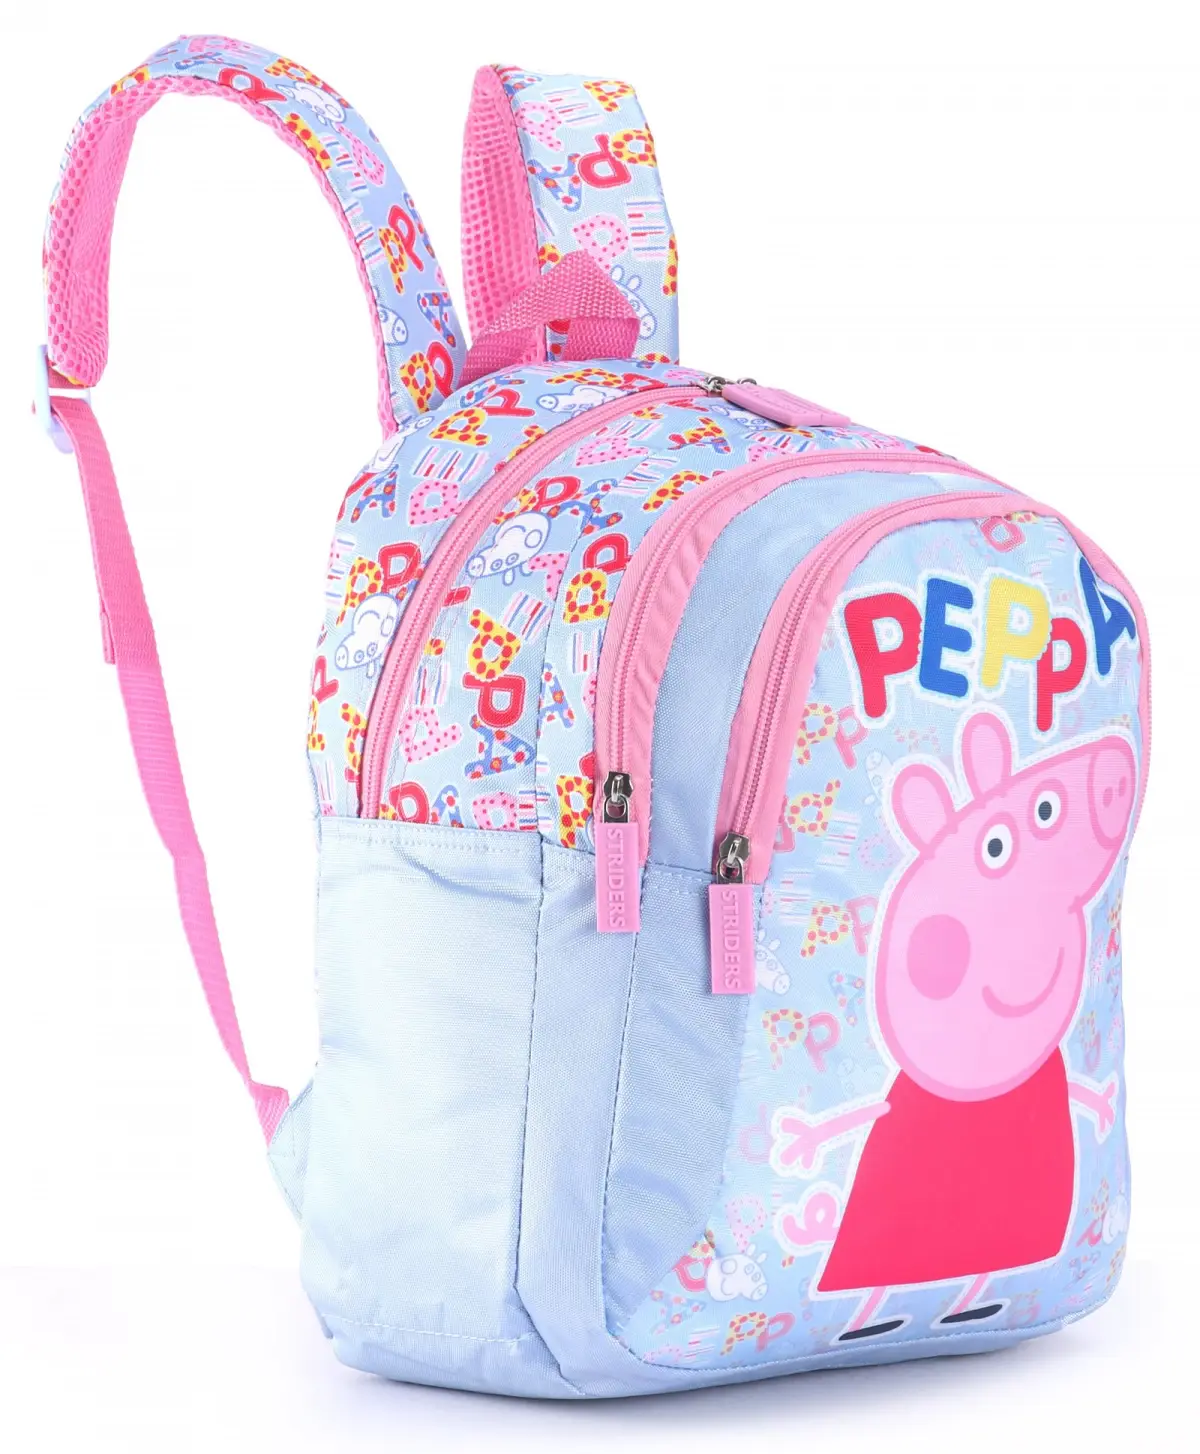 Striders 14 inches Peppa Pig-Inspired School Bag for Little Explorers Age Multicolour, 3Y+